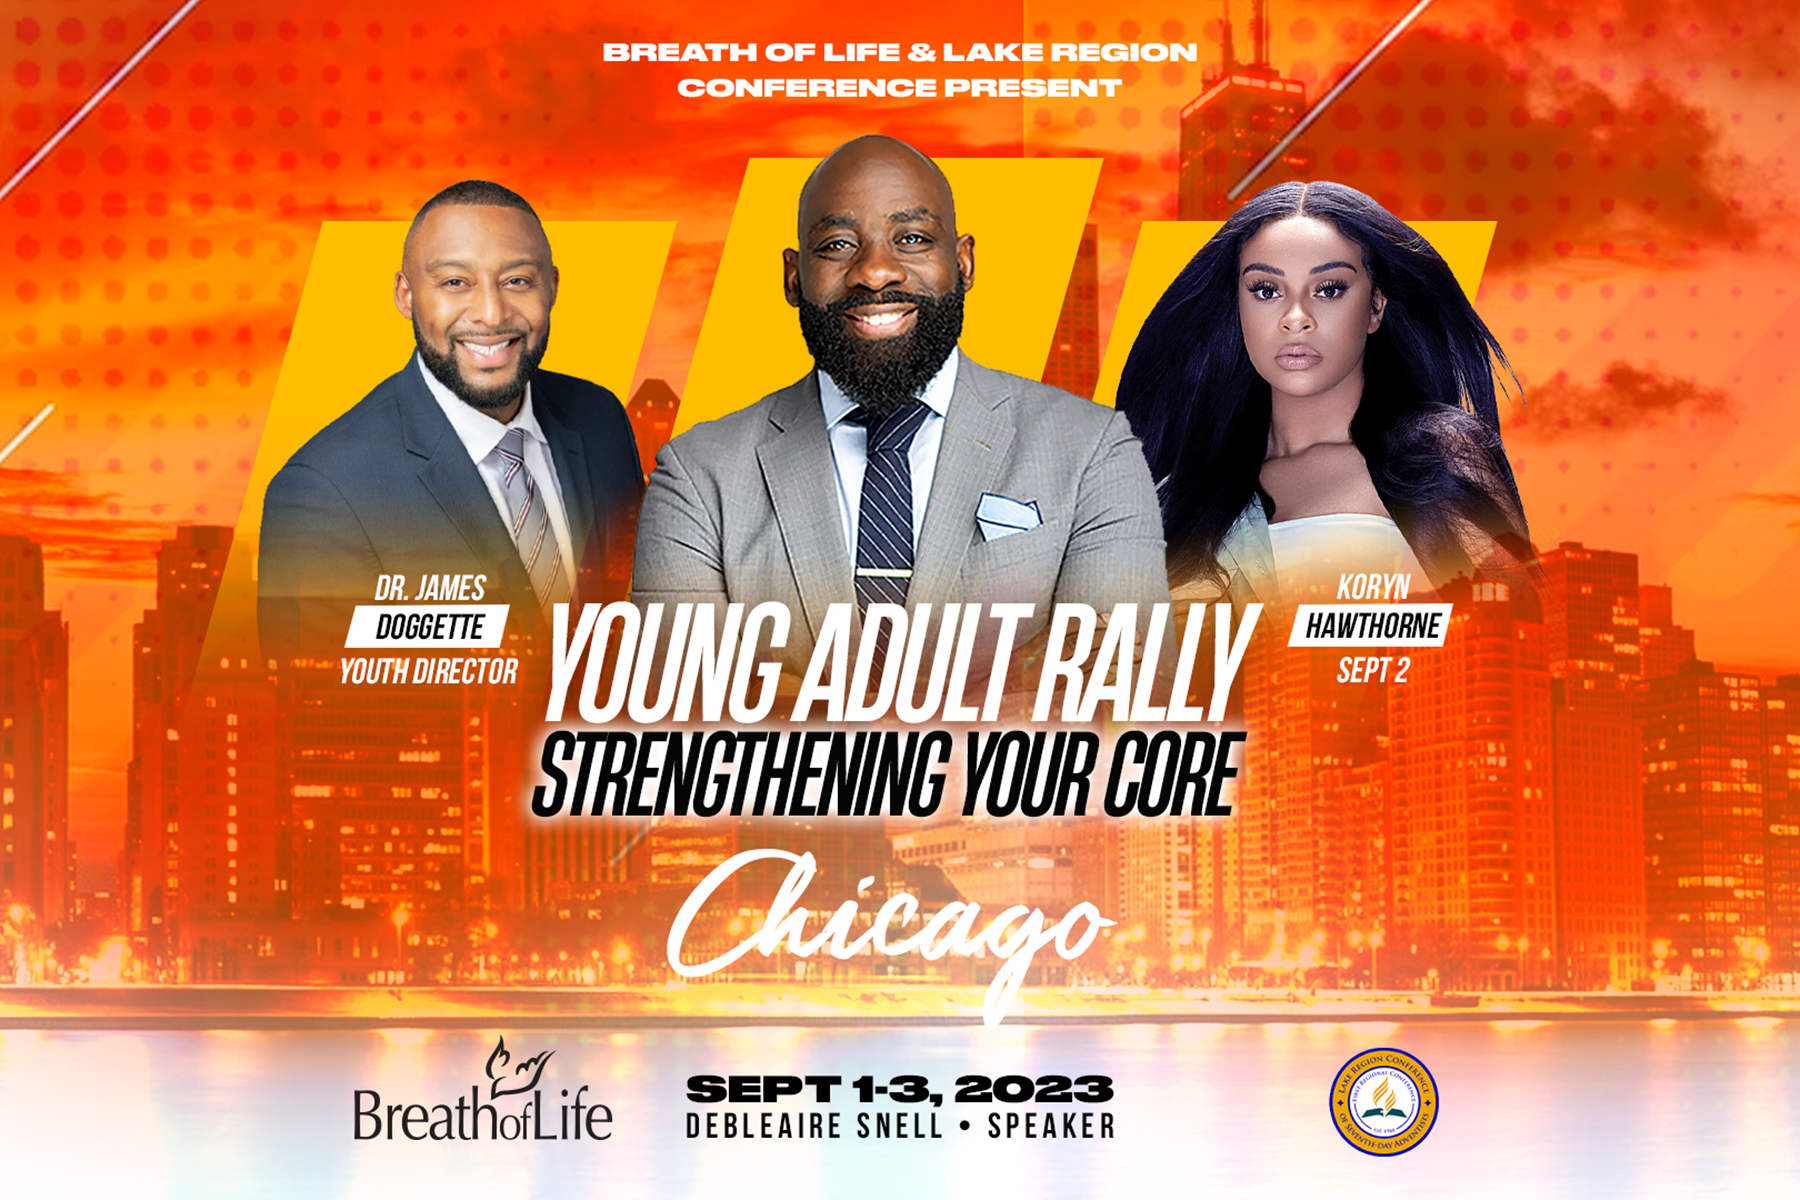 Promotional flyer for Young Adult Rally; left to right - two black men and a black woman